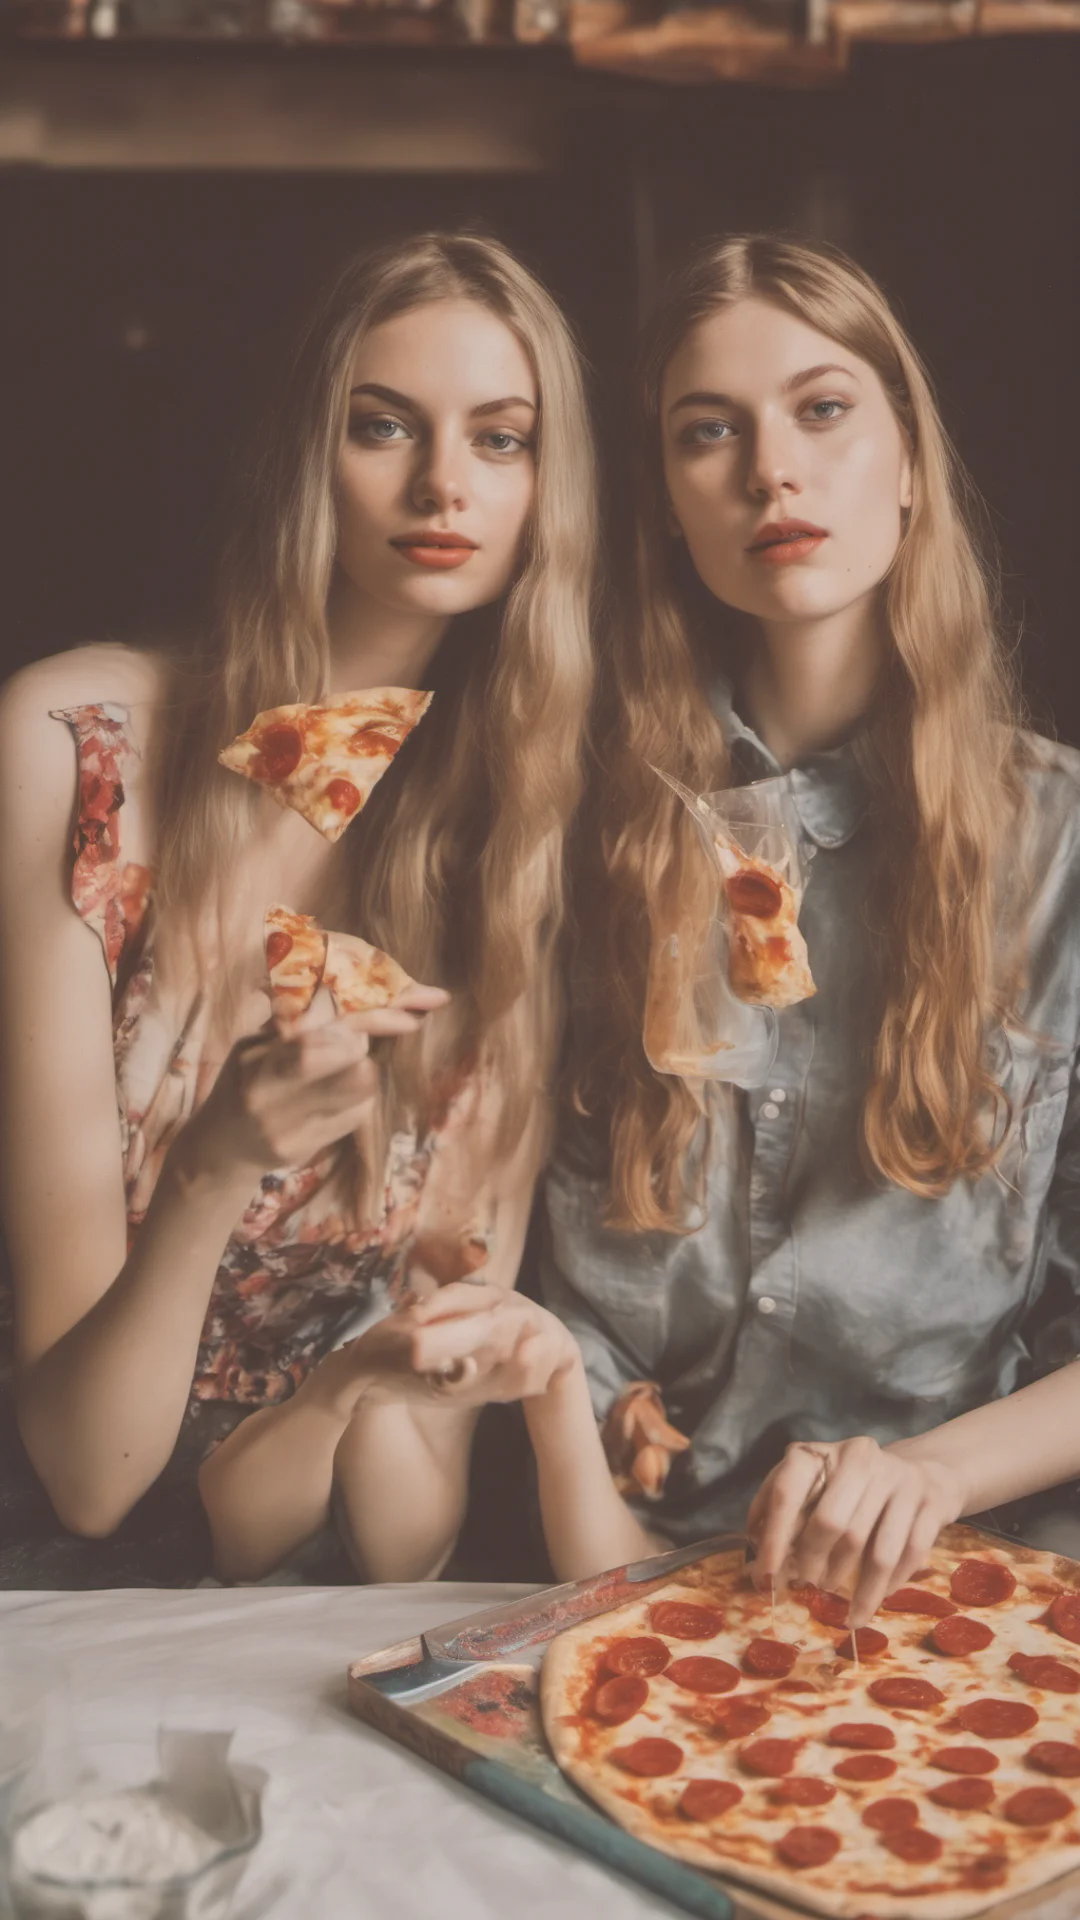 polaroid style image of two sensual german girls  22 yo   sharing a dr. oetker pizza ing confident engaging wow artstation art 3 tall